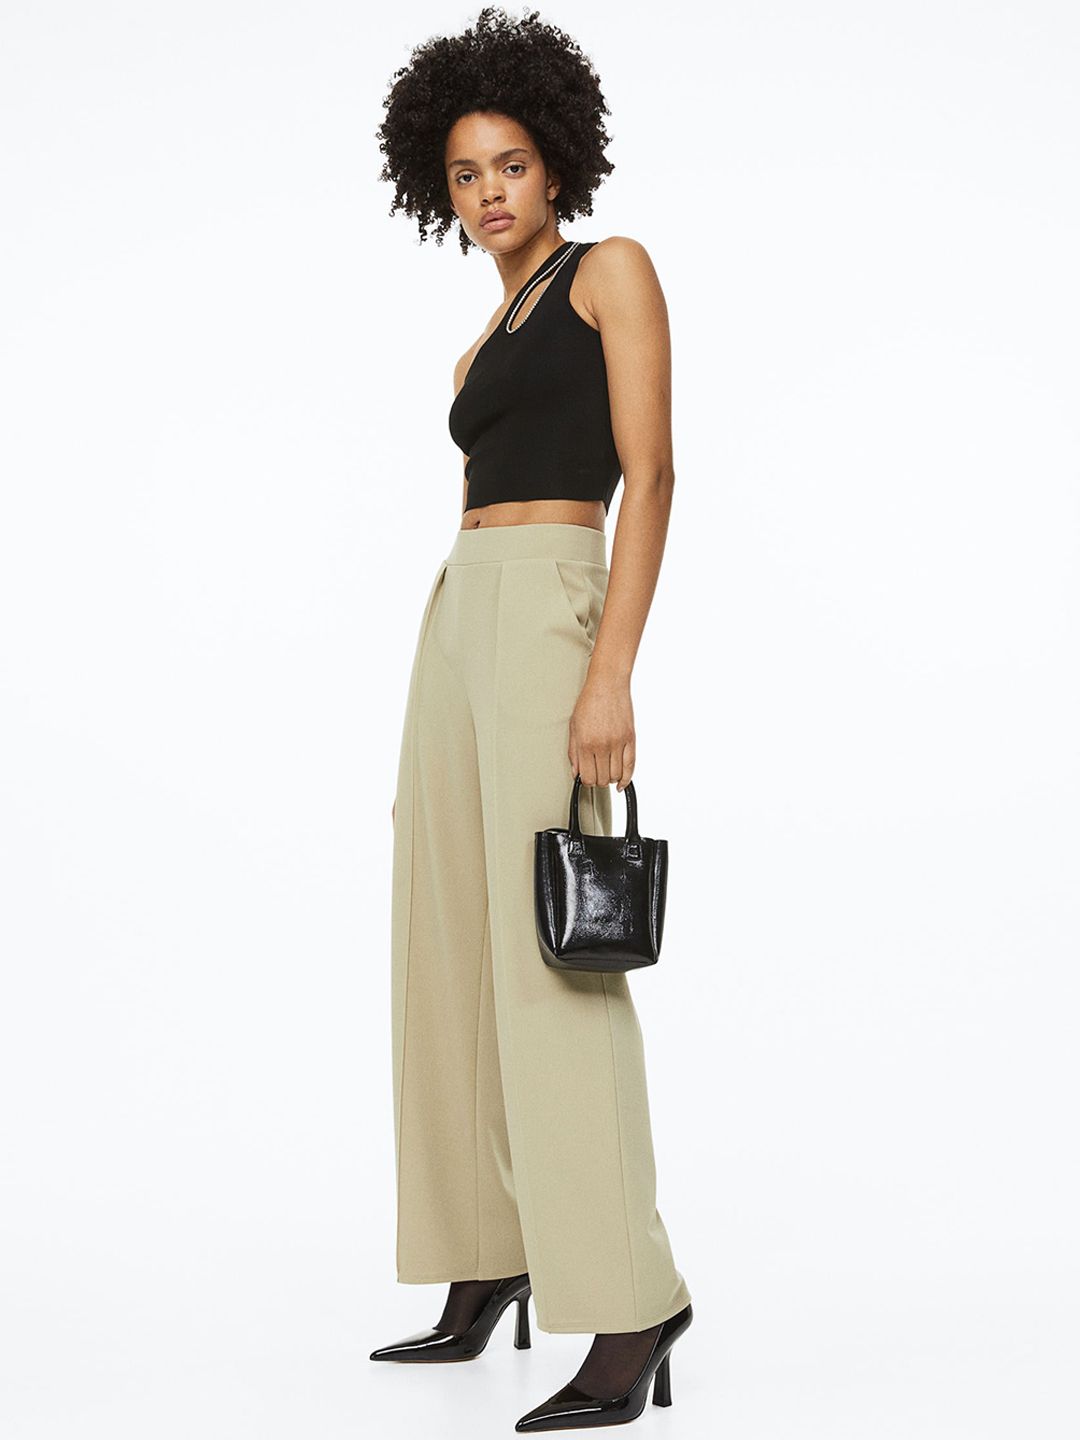 H&M Women High-Waisted Tailored Trousers Price in India